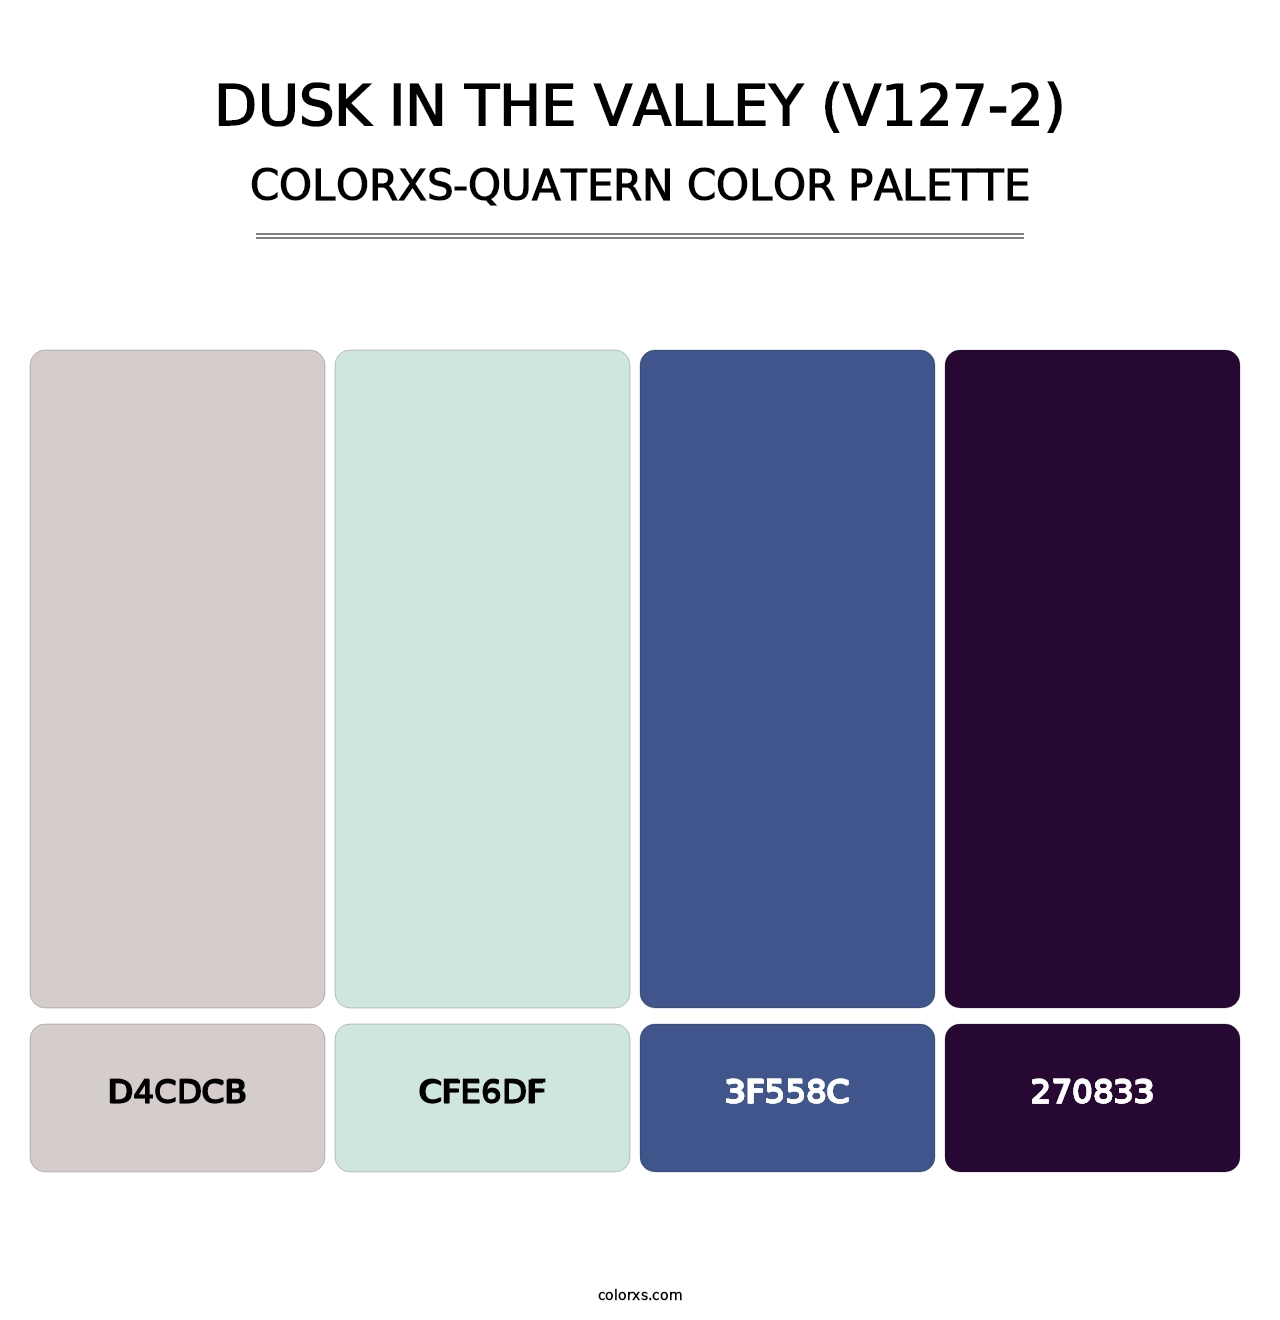 Dusk in the Valley (V127-2) - Colorxs Quatern Palette